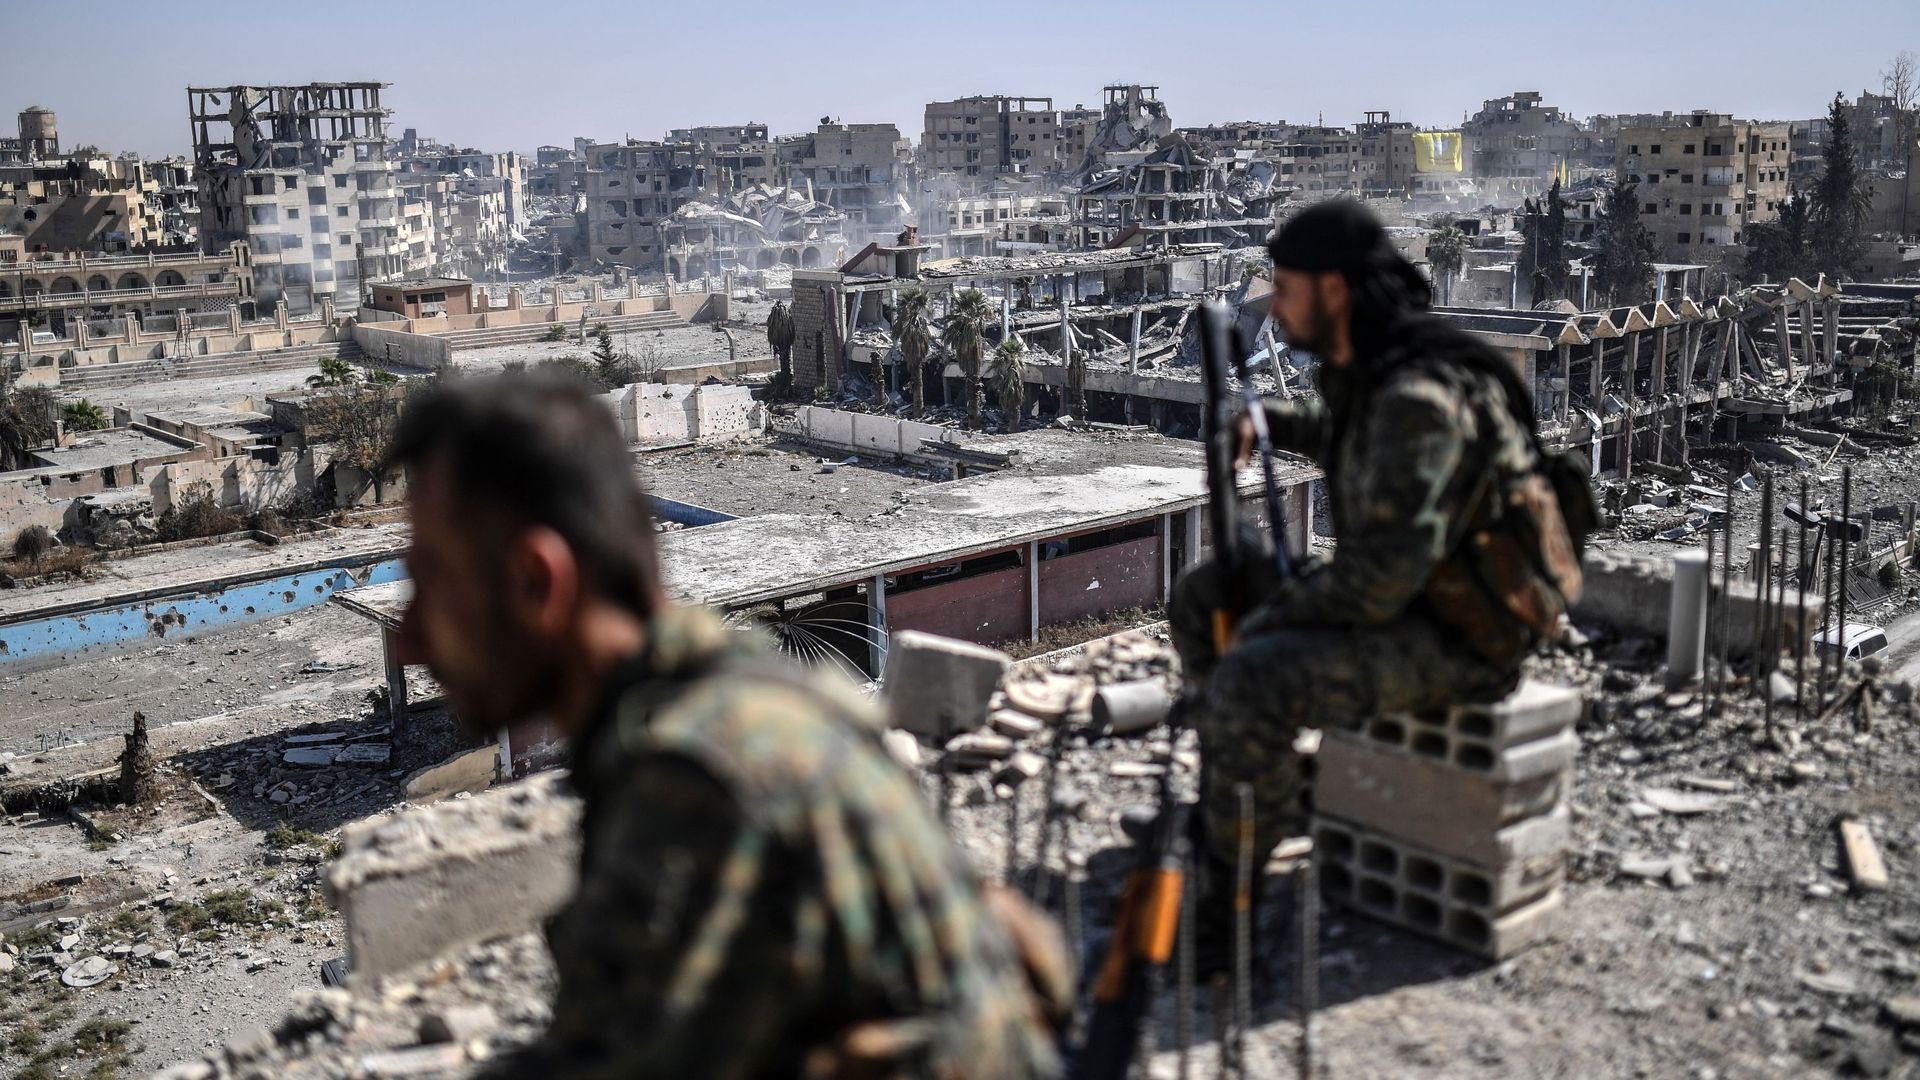 Fighters of the Syrian Democratic Forces (SDF) stand guard on a rooftop.